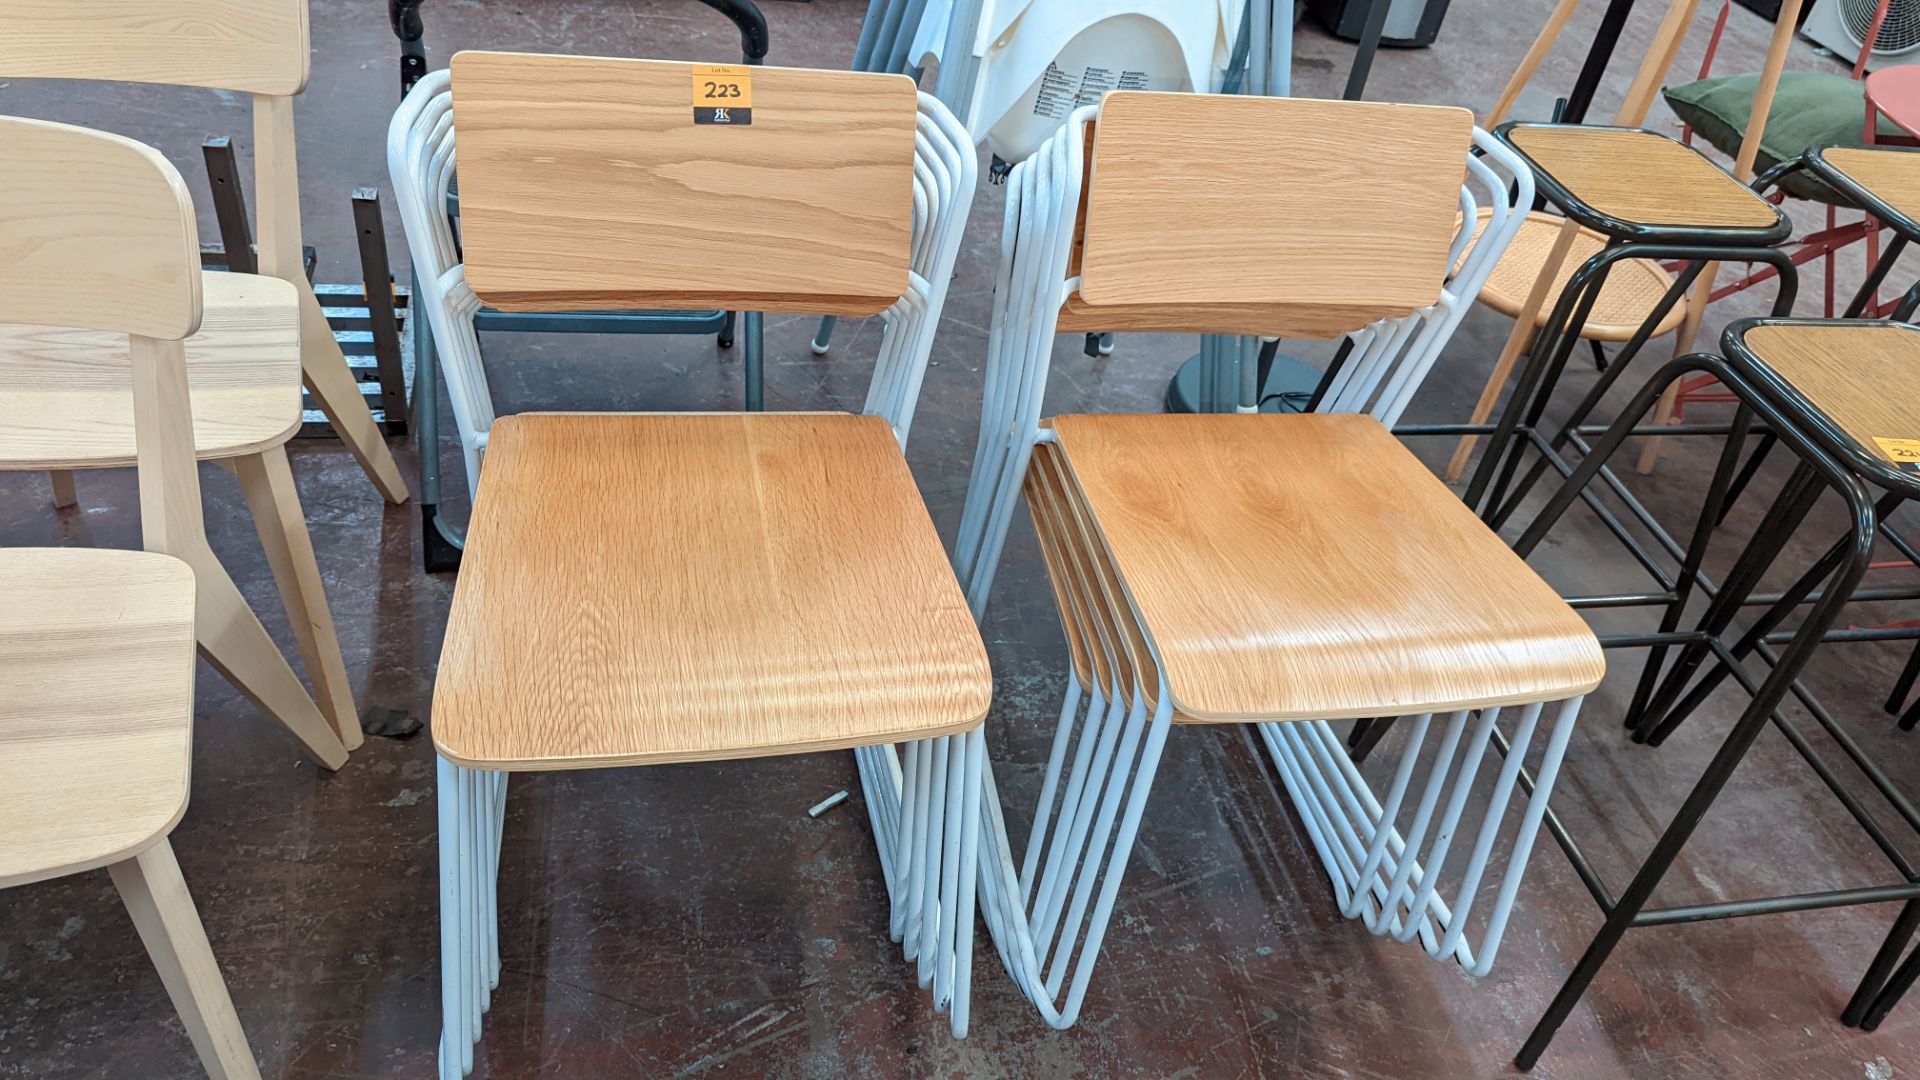 10 off matching stacking chairs comprising white metal frames & wooden backs/bases